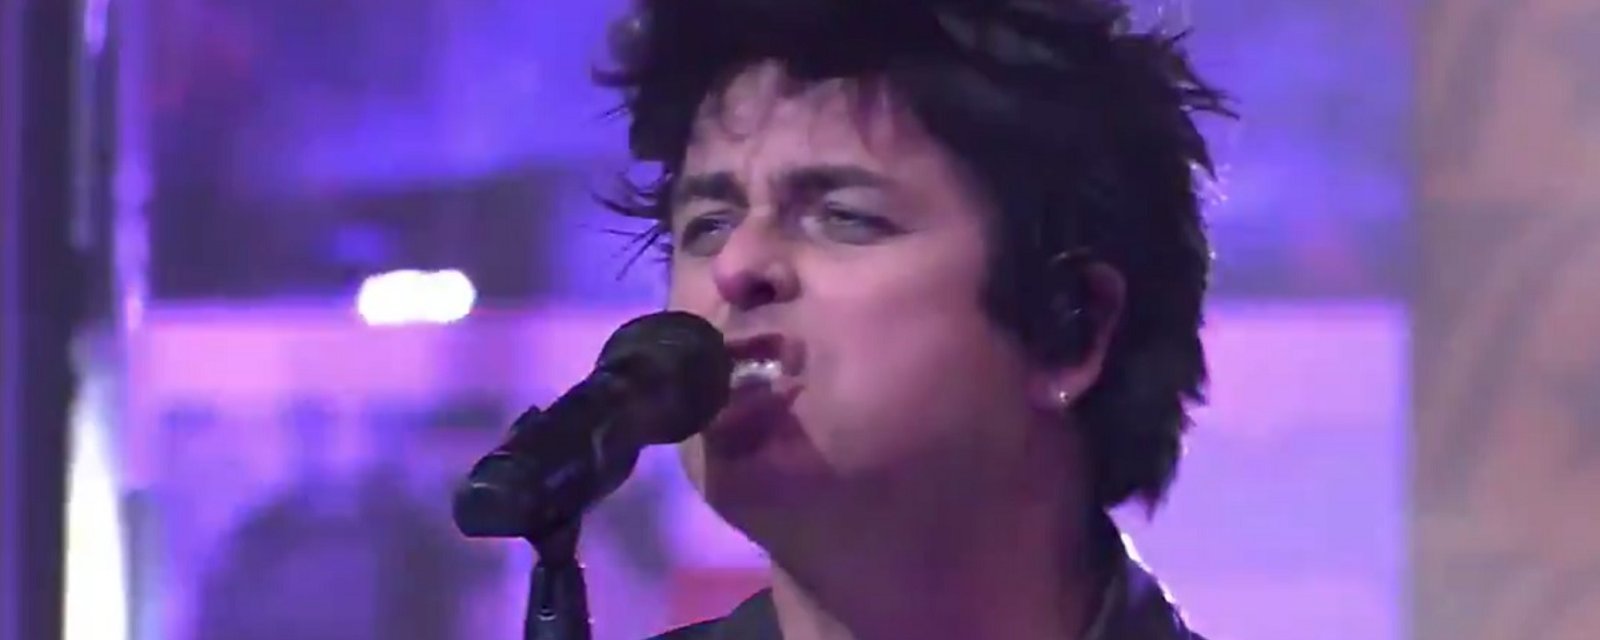 Green Day's Billie Joe drops a massive F-Bomb during All Star Game performance.